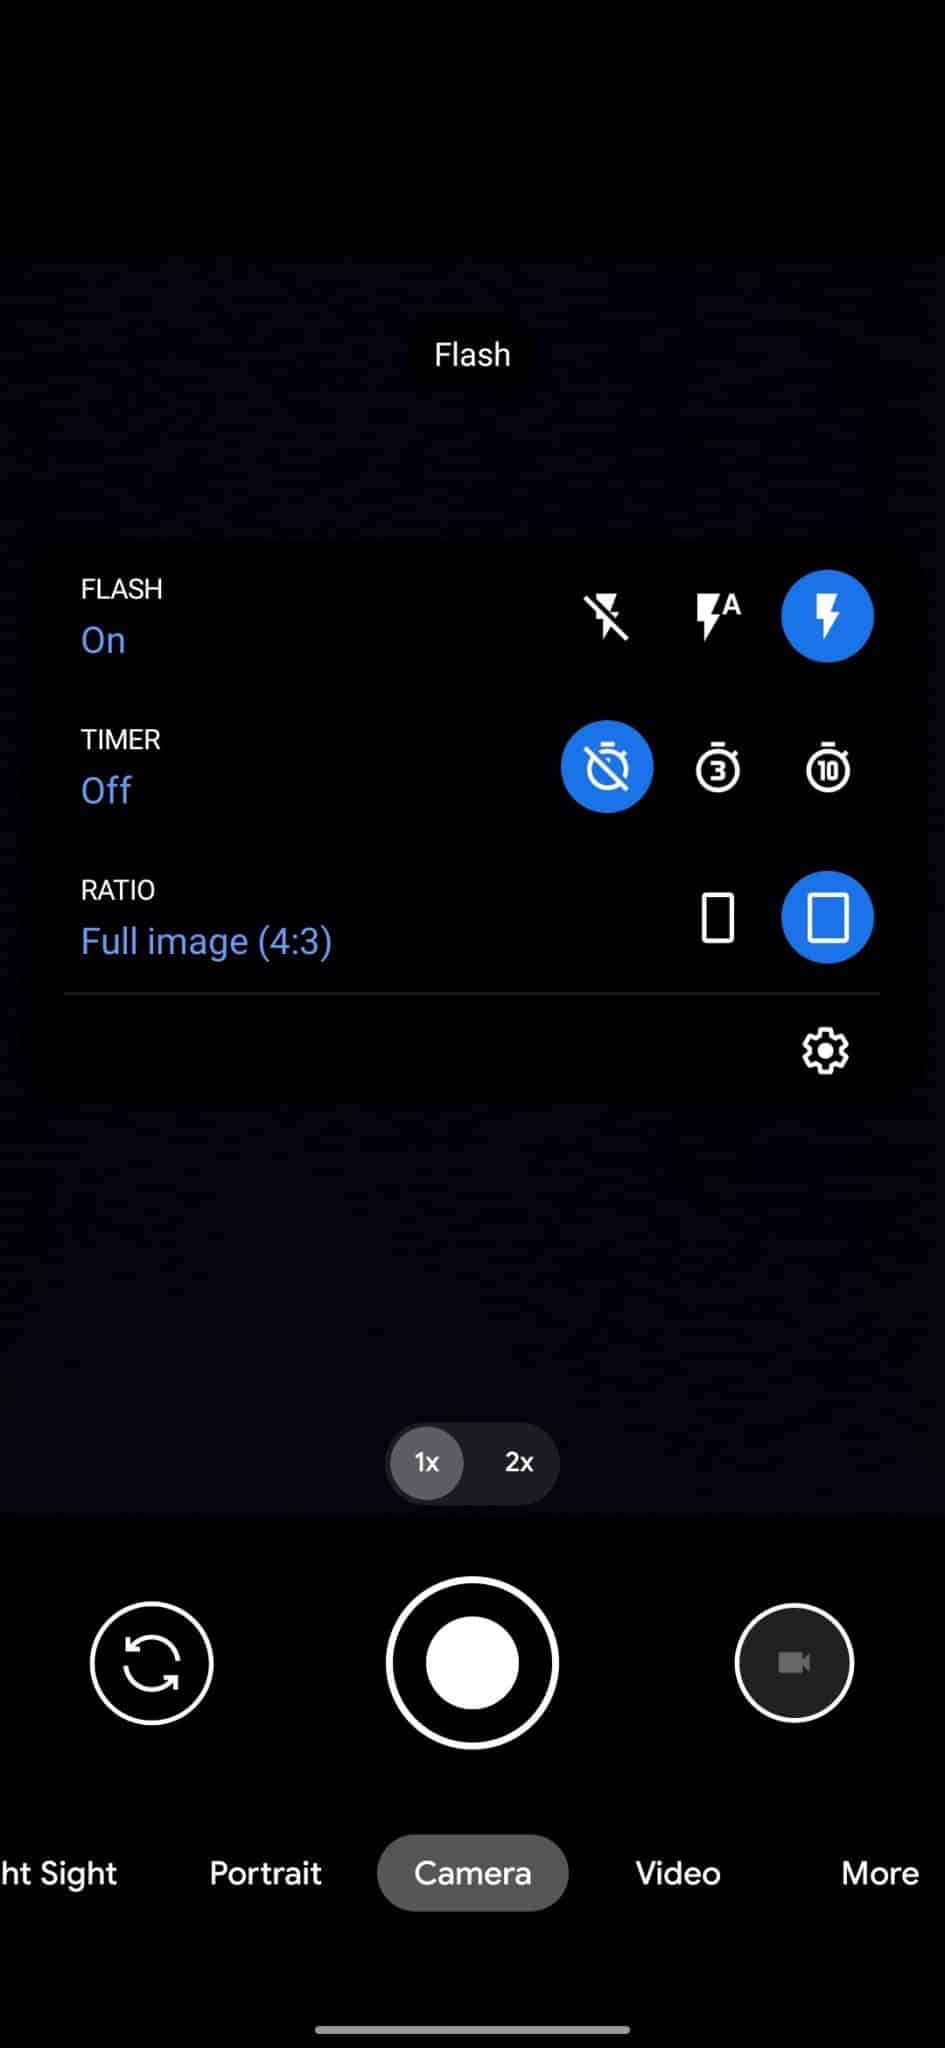 Download Google Camera 8.0 from the Pixel 5 on Oneplus 6 & 6T